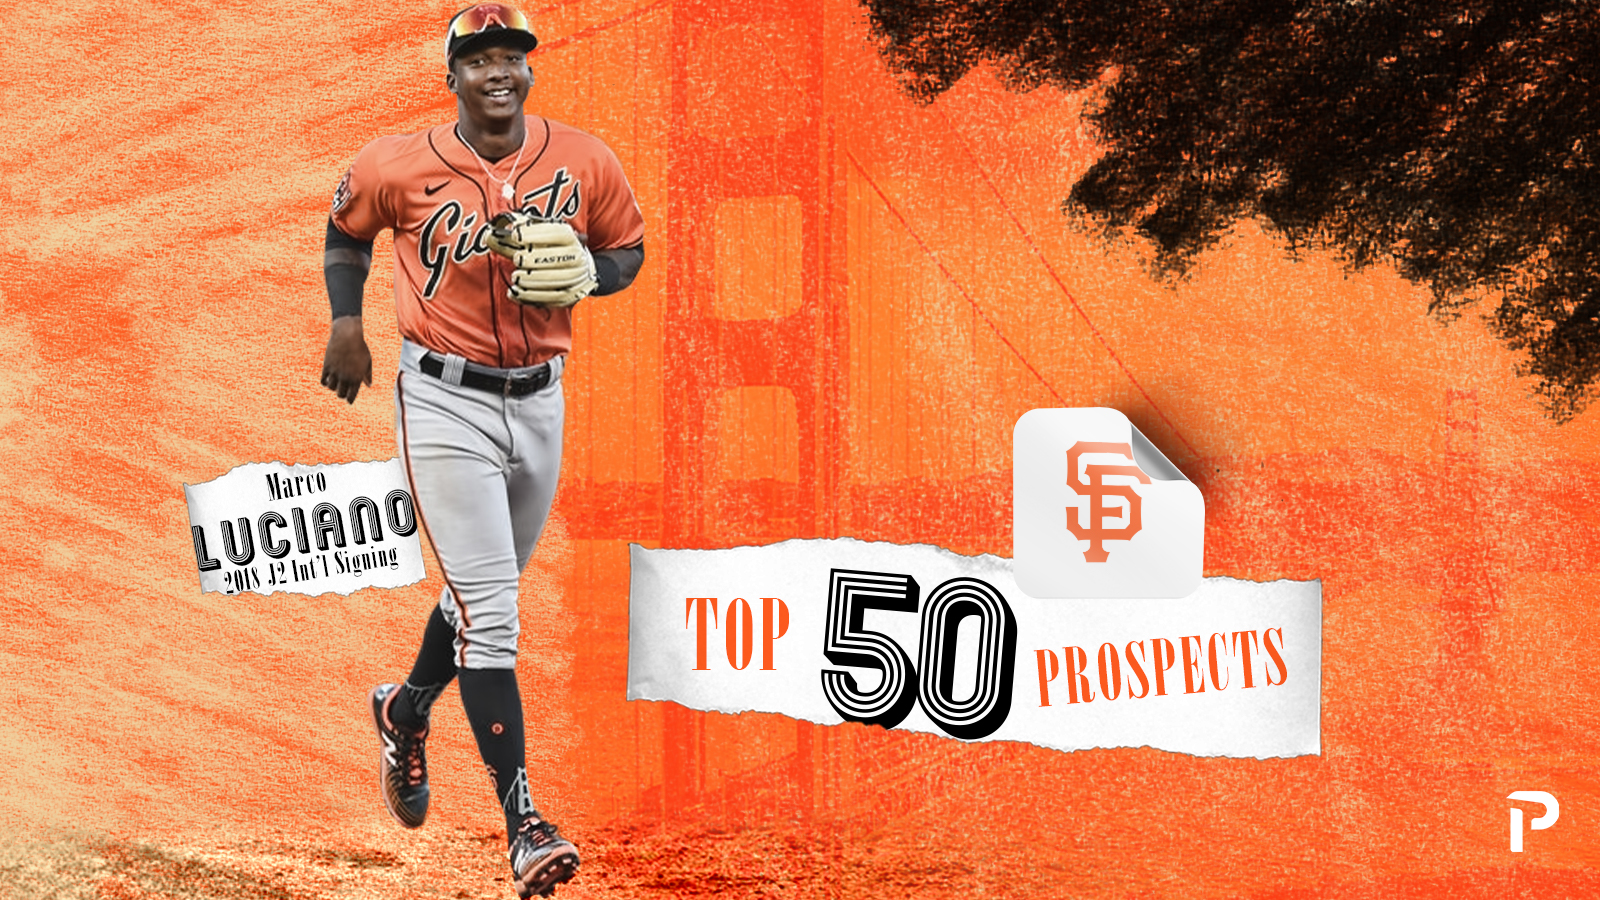 Historic Road Bumps for SF Giants, But Harrison, Luciano & Fitzgerald Shine  Through